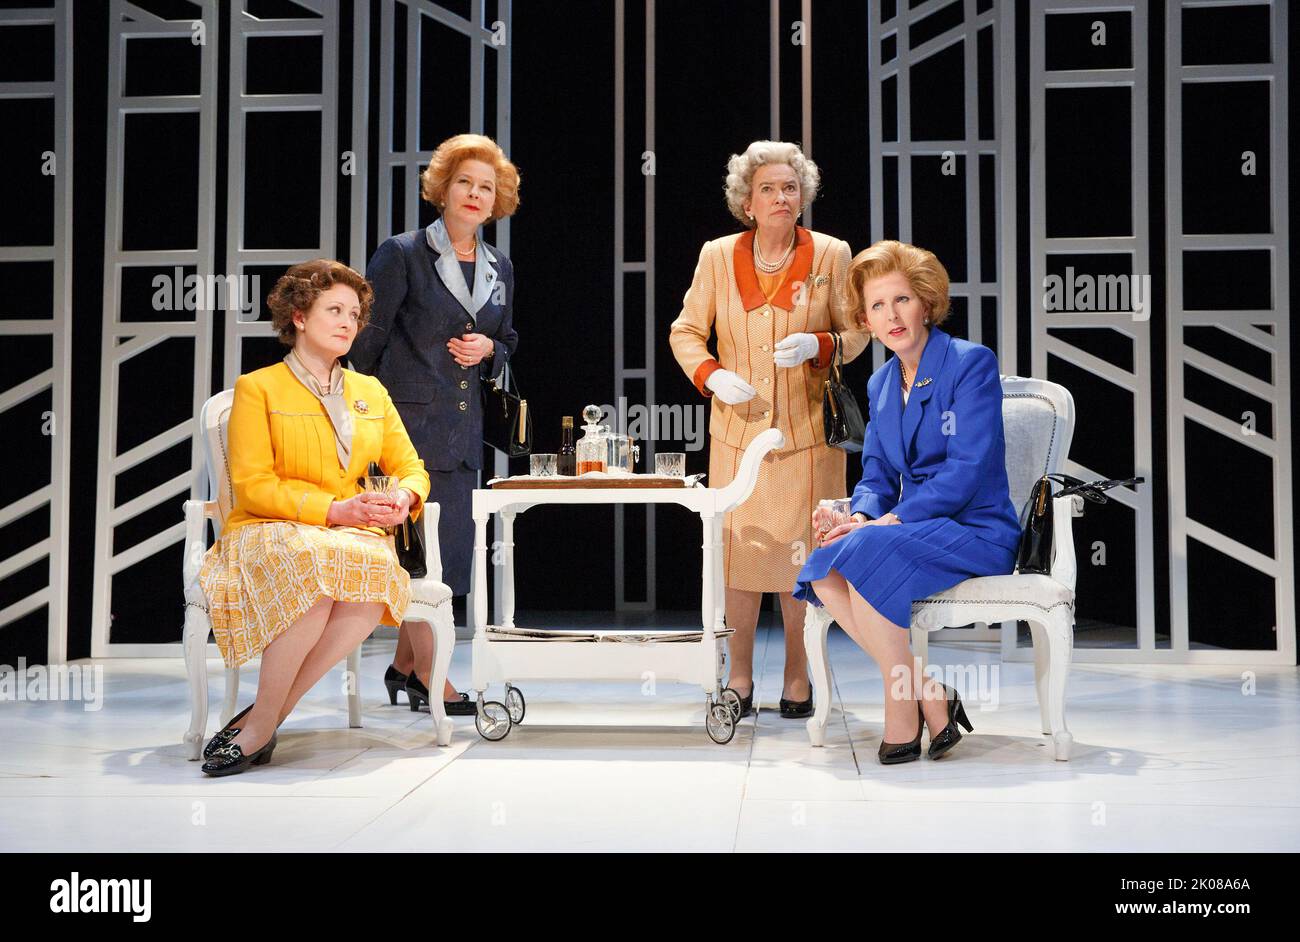 l-r: Lucy Robinson (Liz - Younger Queen), Stella Gonet (T - Older Thatcher), Marion Bailey (Q - Older Queen), Fenella Woolgar (Mags - Younger Thatcher) in HANDBAGGED by Moira Buffini at the Vaudeville Theatre, London WC2   10/04/2014   a Tricycle Theatre, London NW6 2013 production  design: Richard Kent  lighting: Oliver Fenwick  director: Indhu Rubasingham Stock Photo